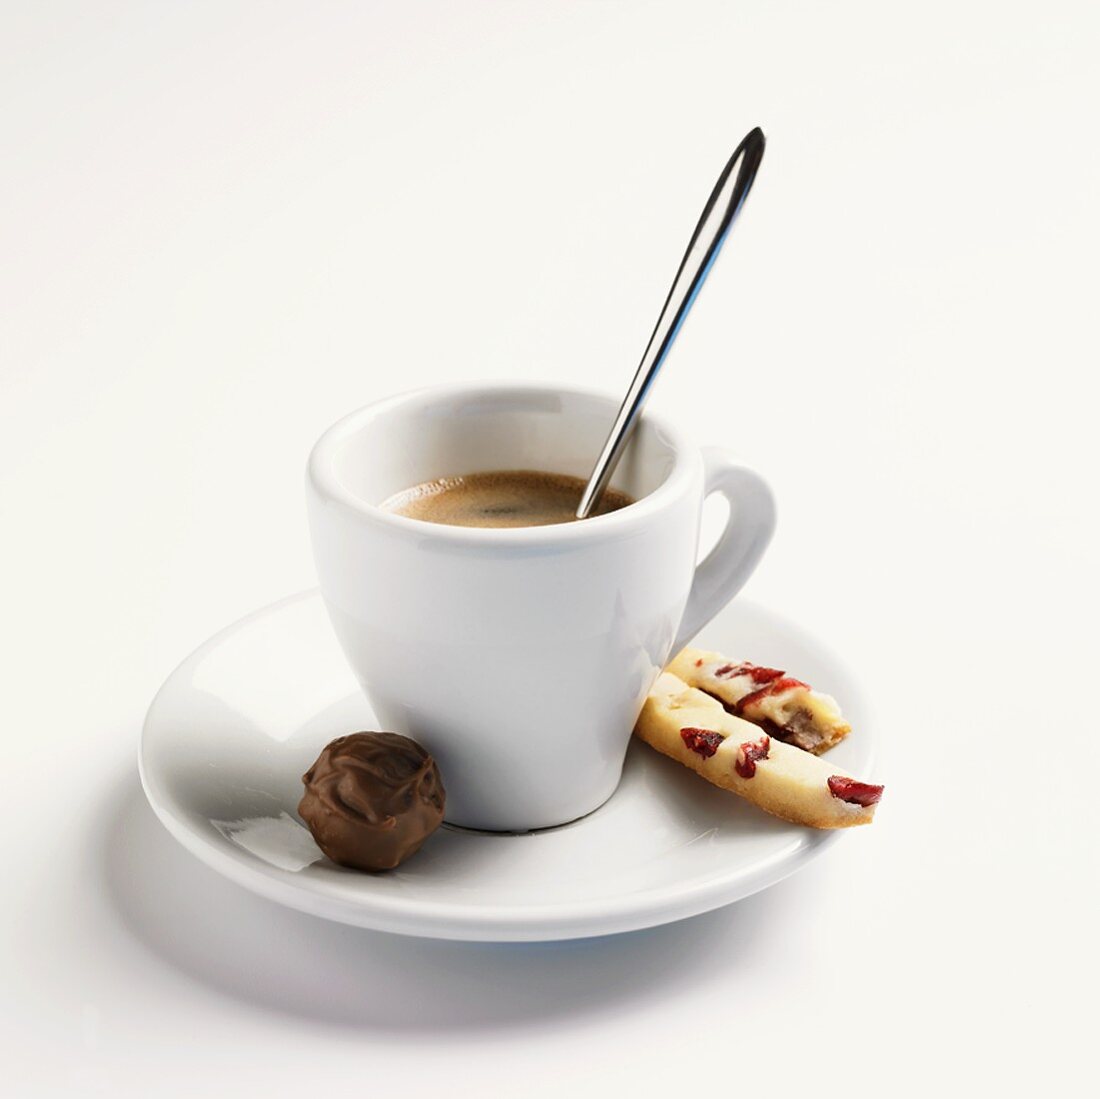 A double espresso with chocolate and pastry